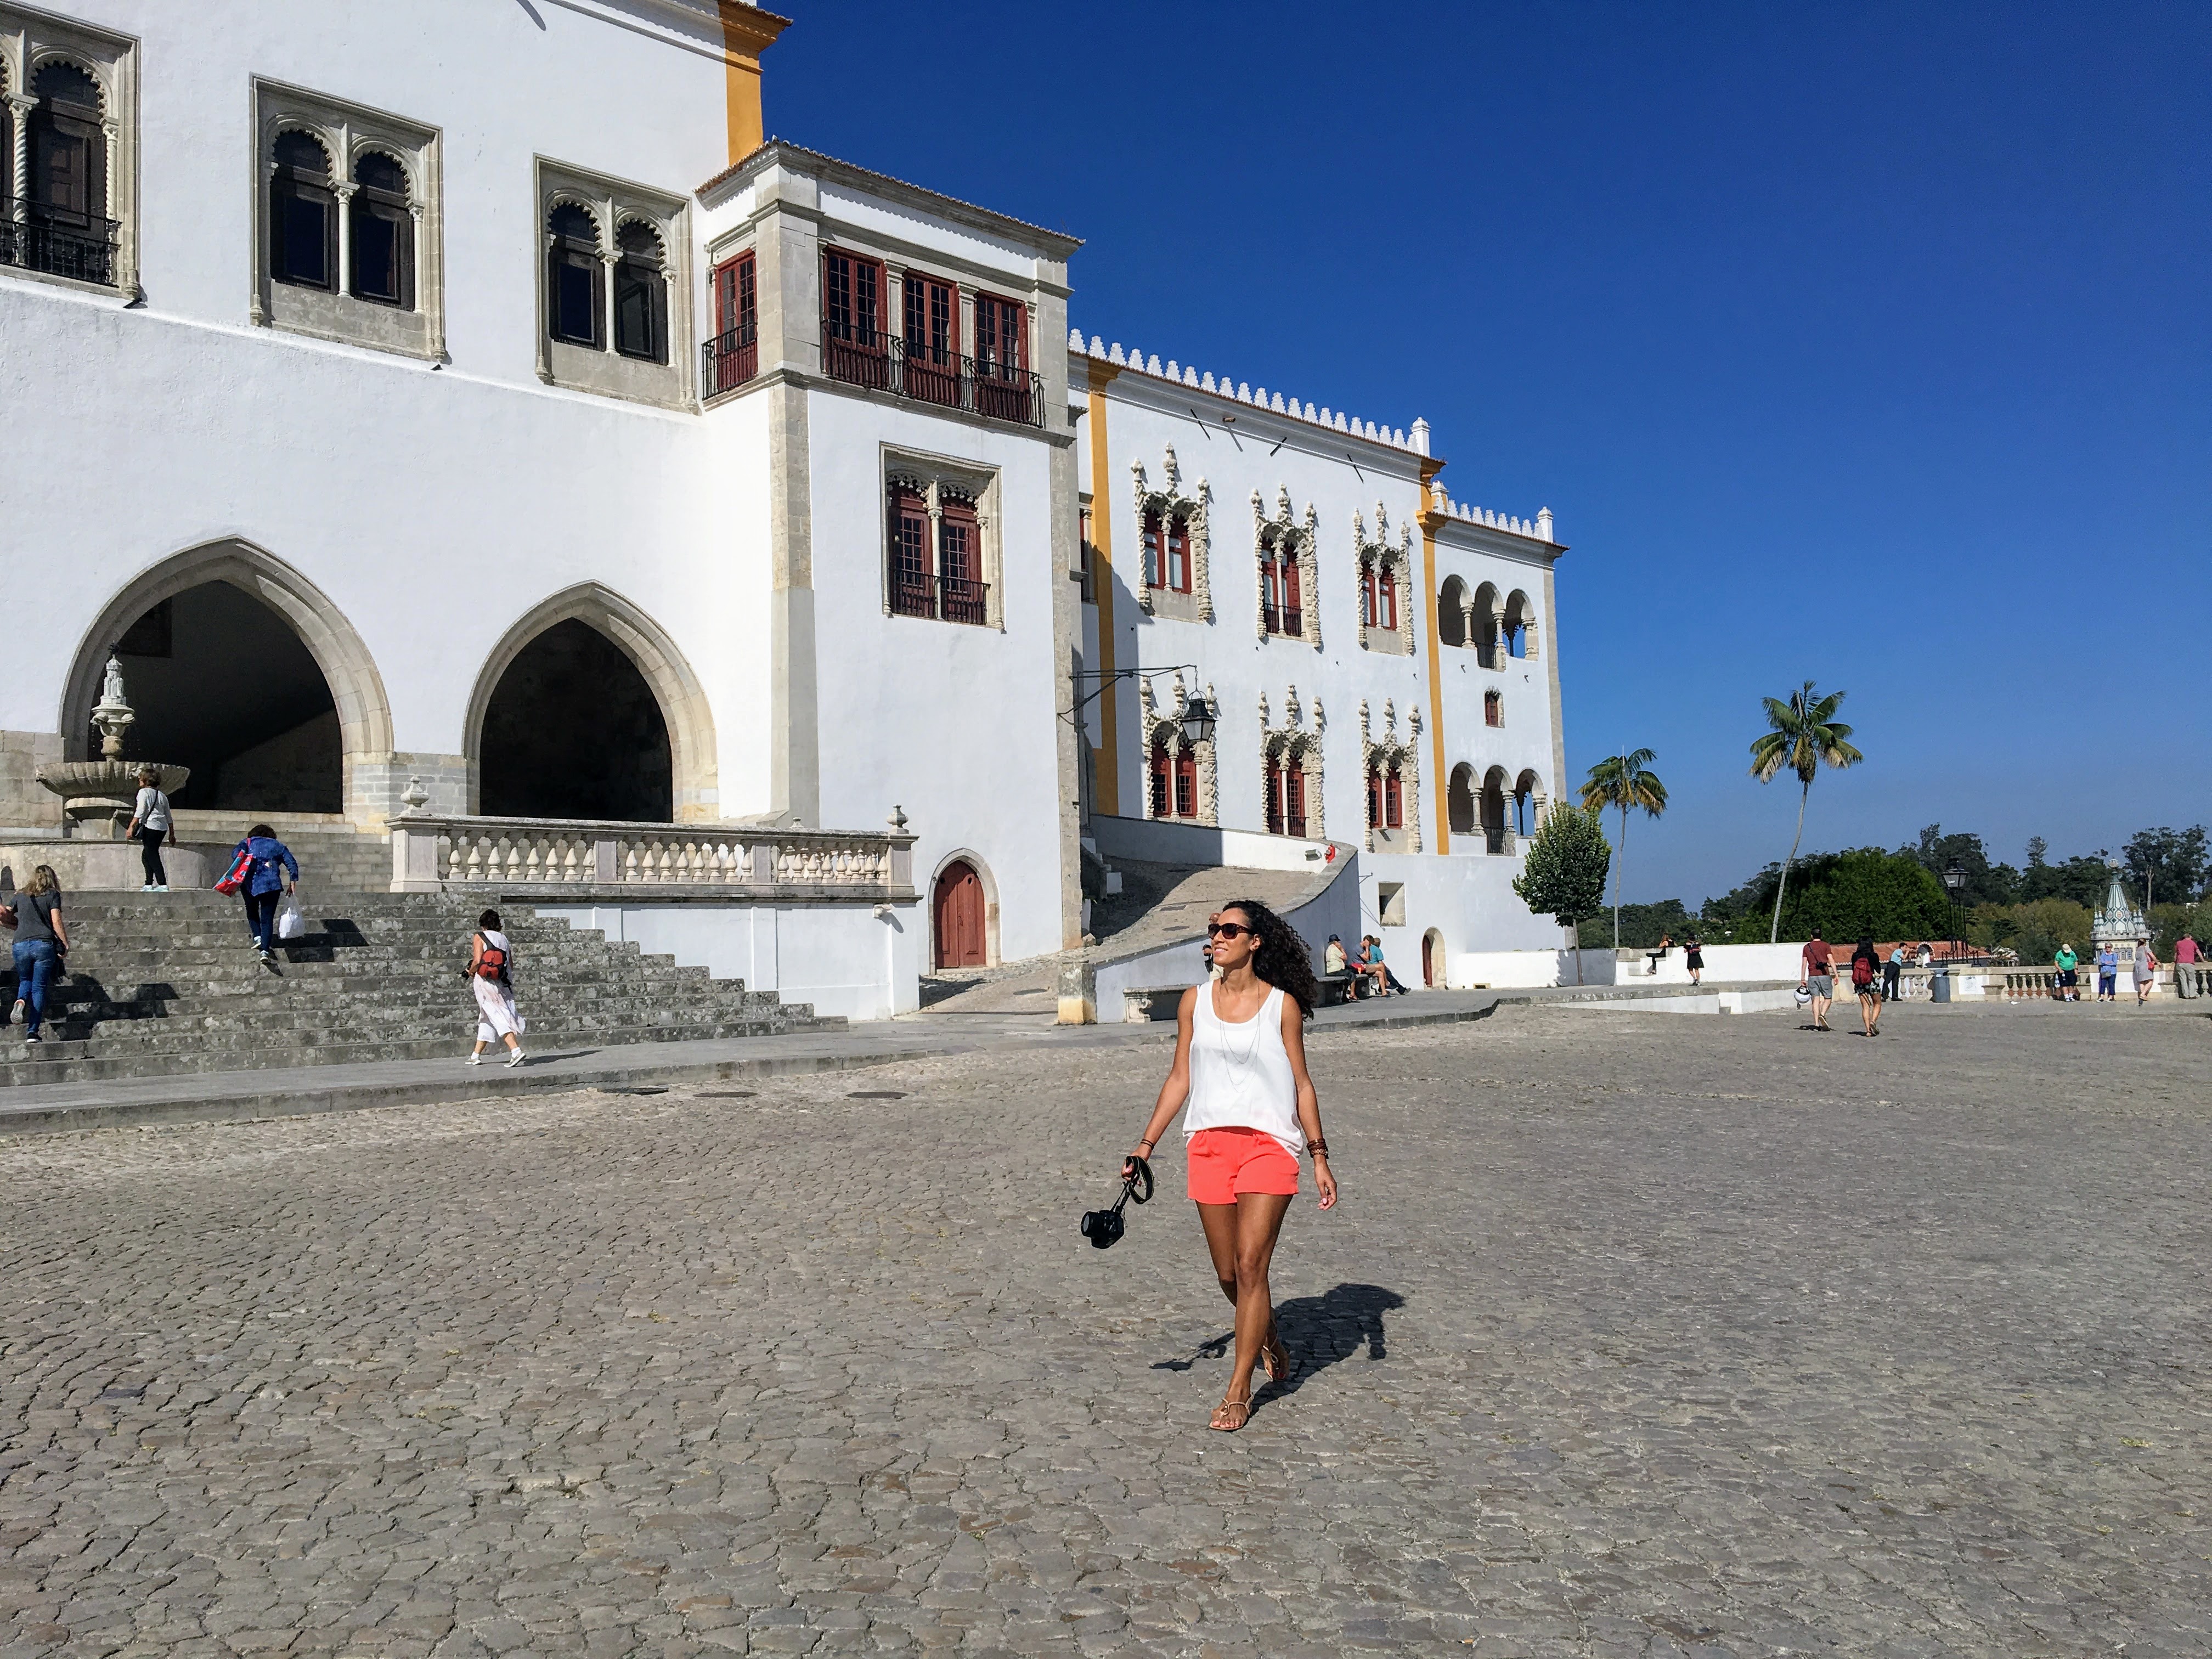 Outside the National Palace in Sintra, Portugal